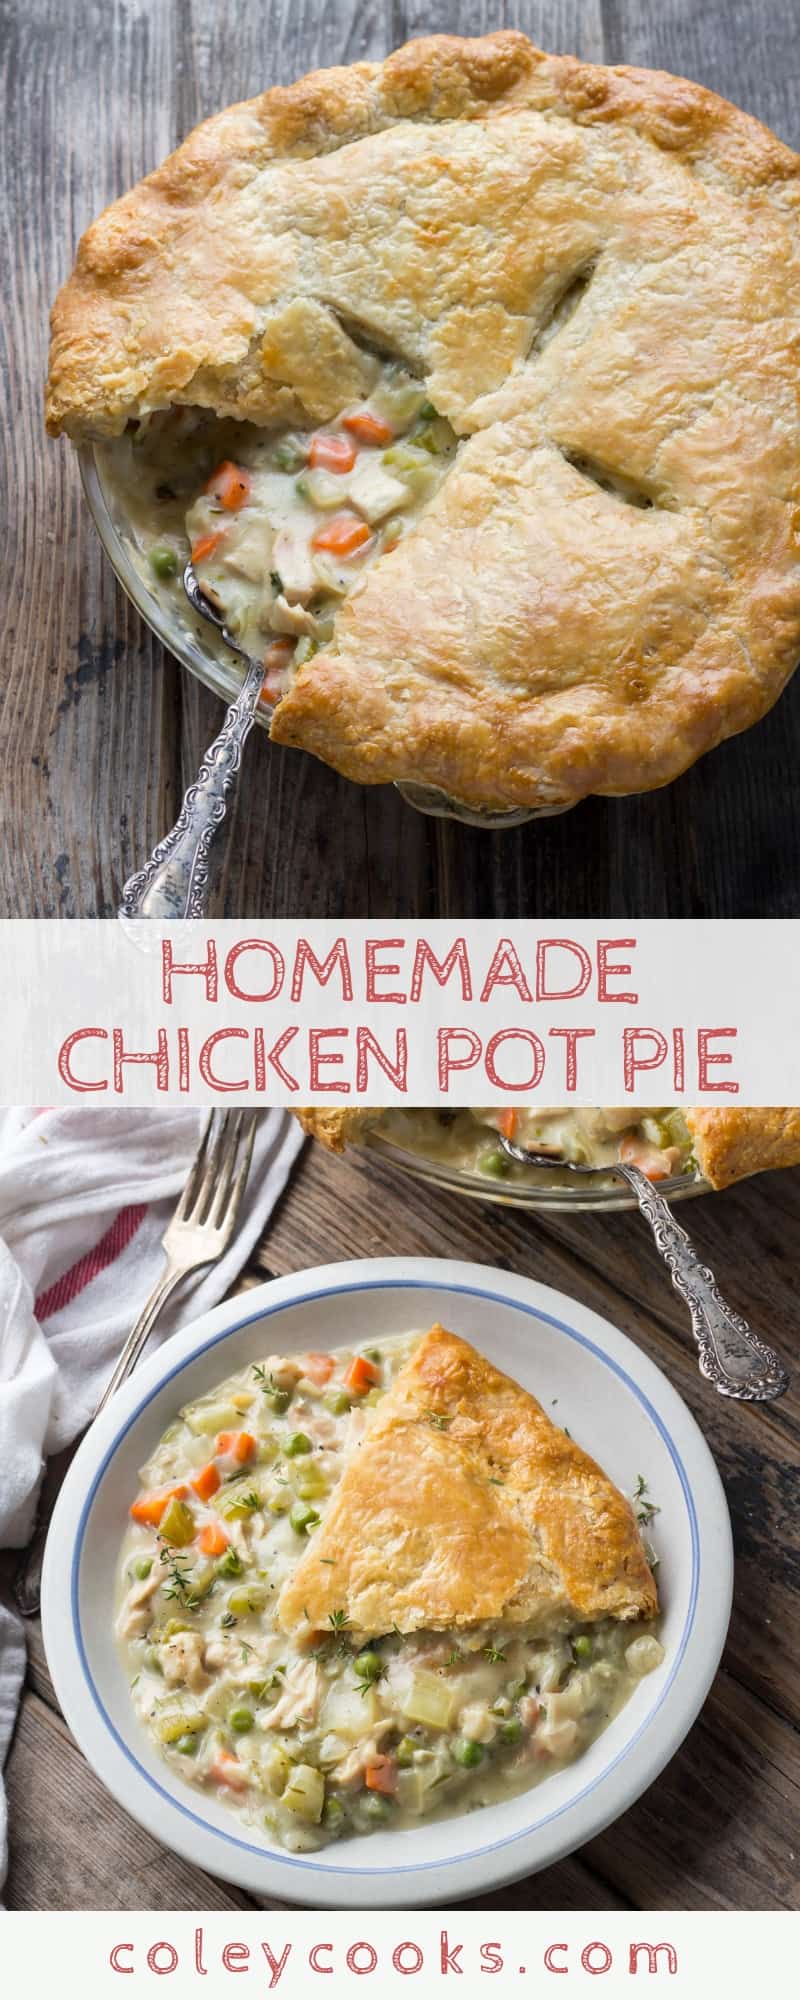 HOMEMADE CHICKEN POT PIE | The best recipe for chicken pot pie ever. Buttery crust, tender chicken lots of vegetabels and a flavorful gravy. #best #fall #recipe #chicken #potpie #pie #savory #dinner #classic | ColeyCooks.com